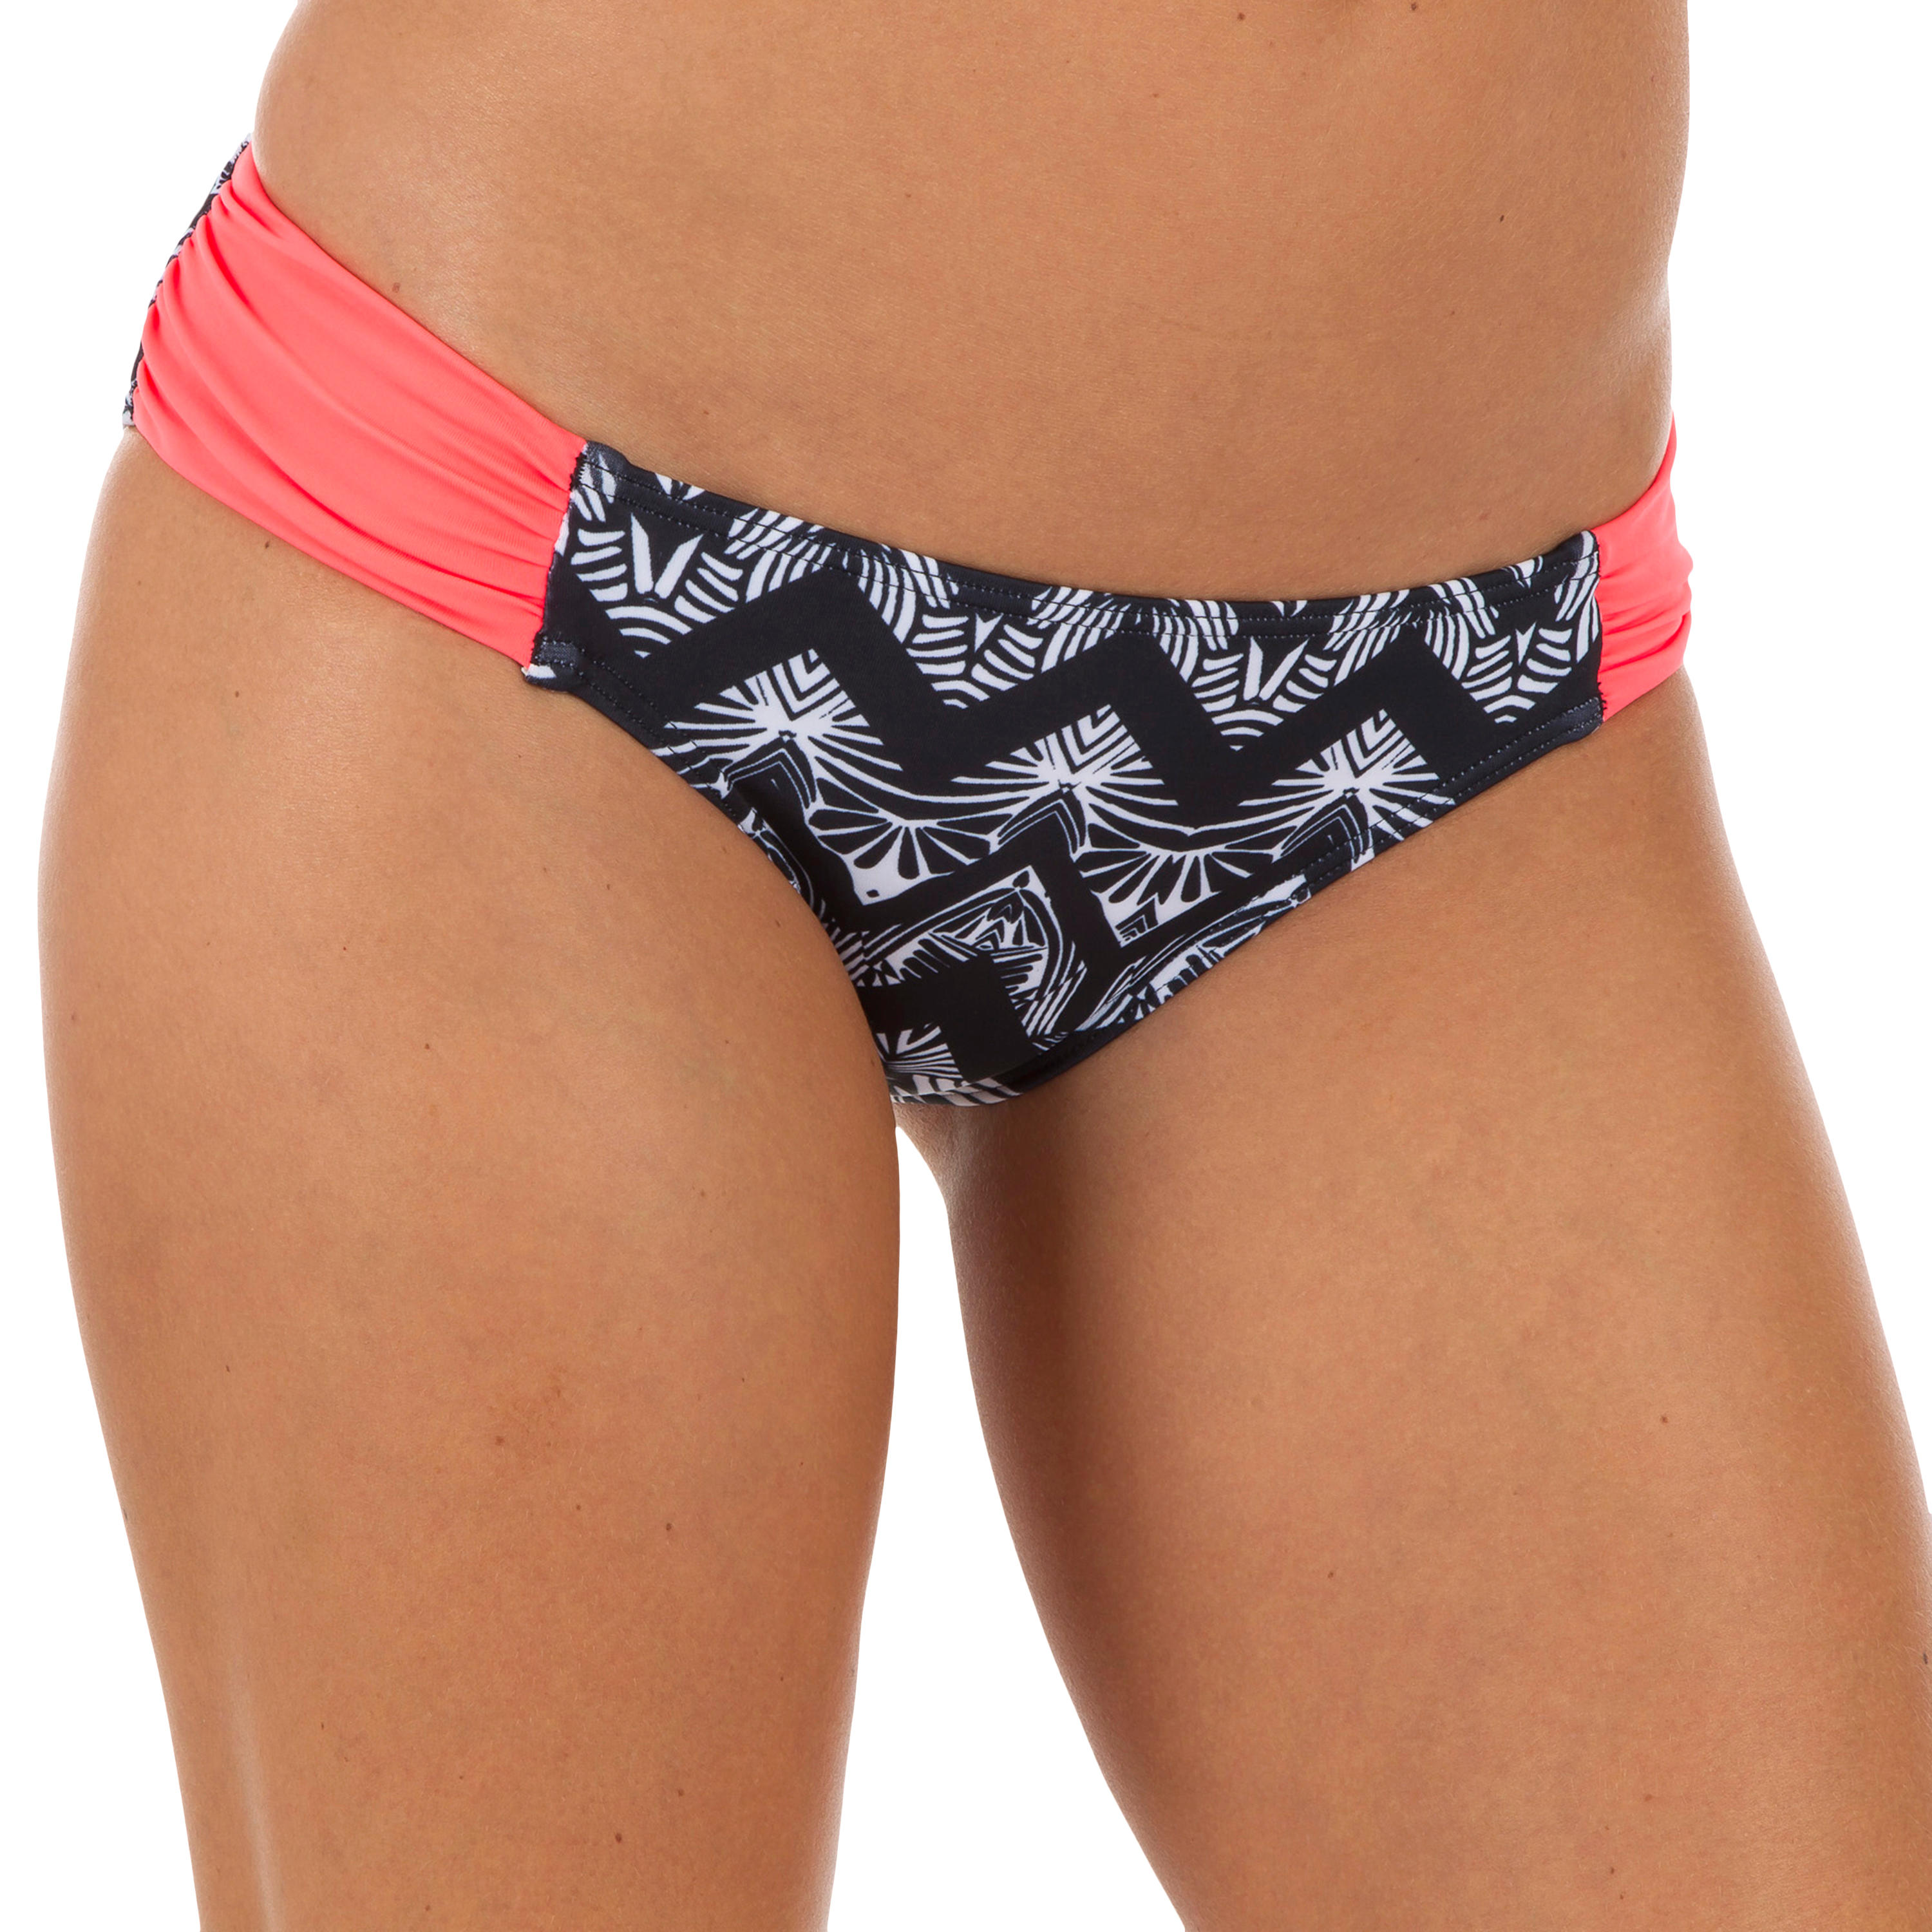 Women's surfing swimsuit bottoms with gathering at the sides NIKI MAWA 3/11